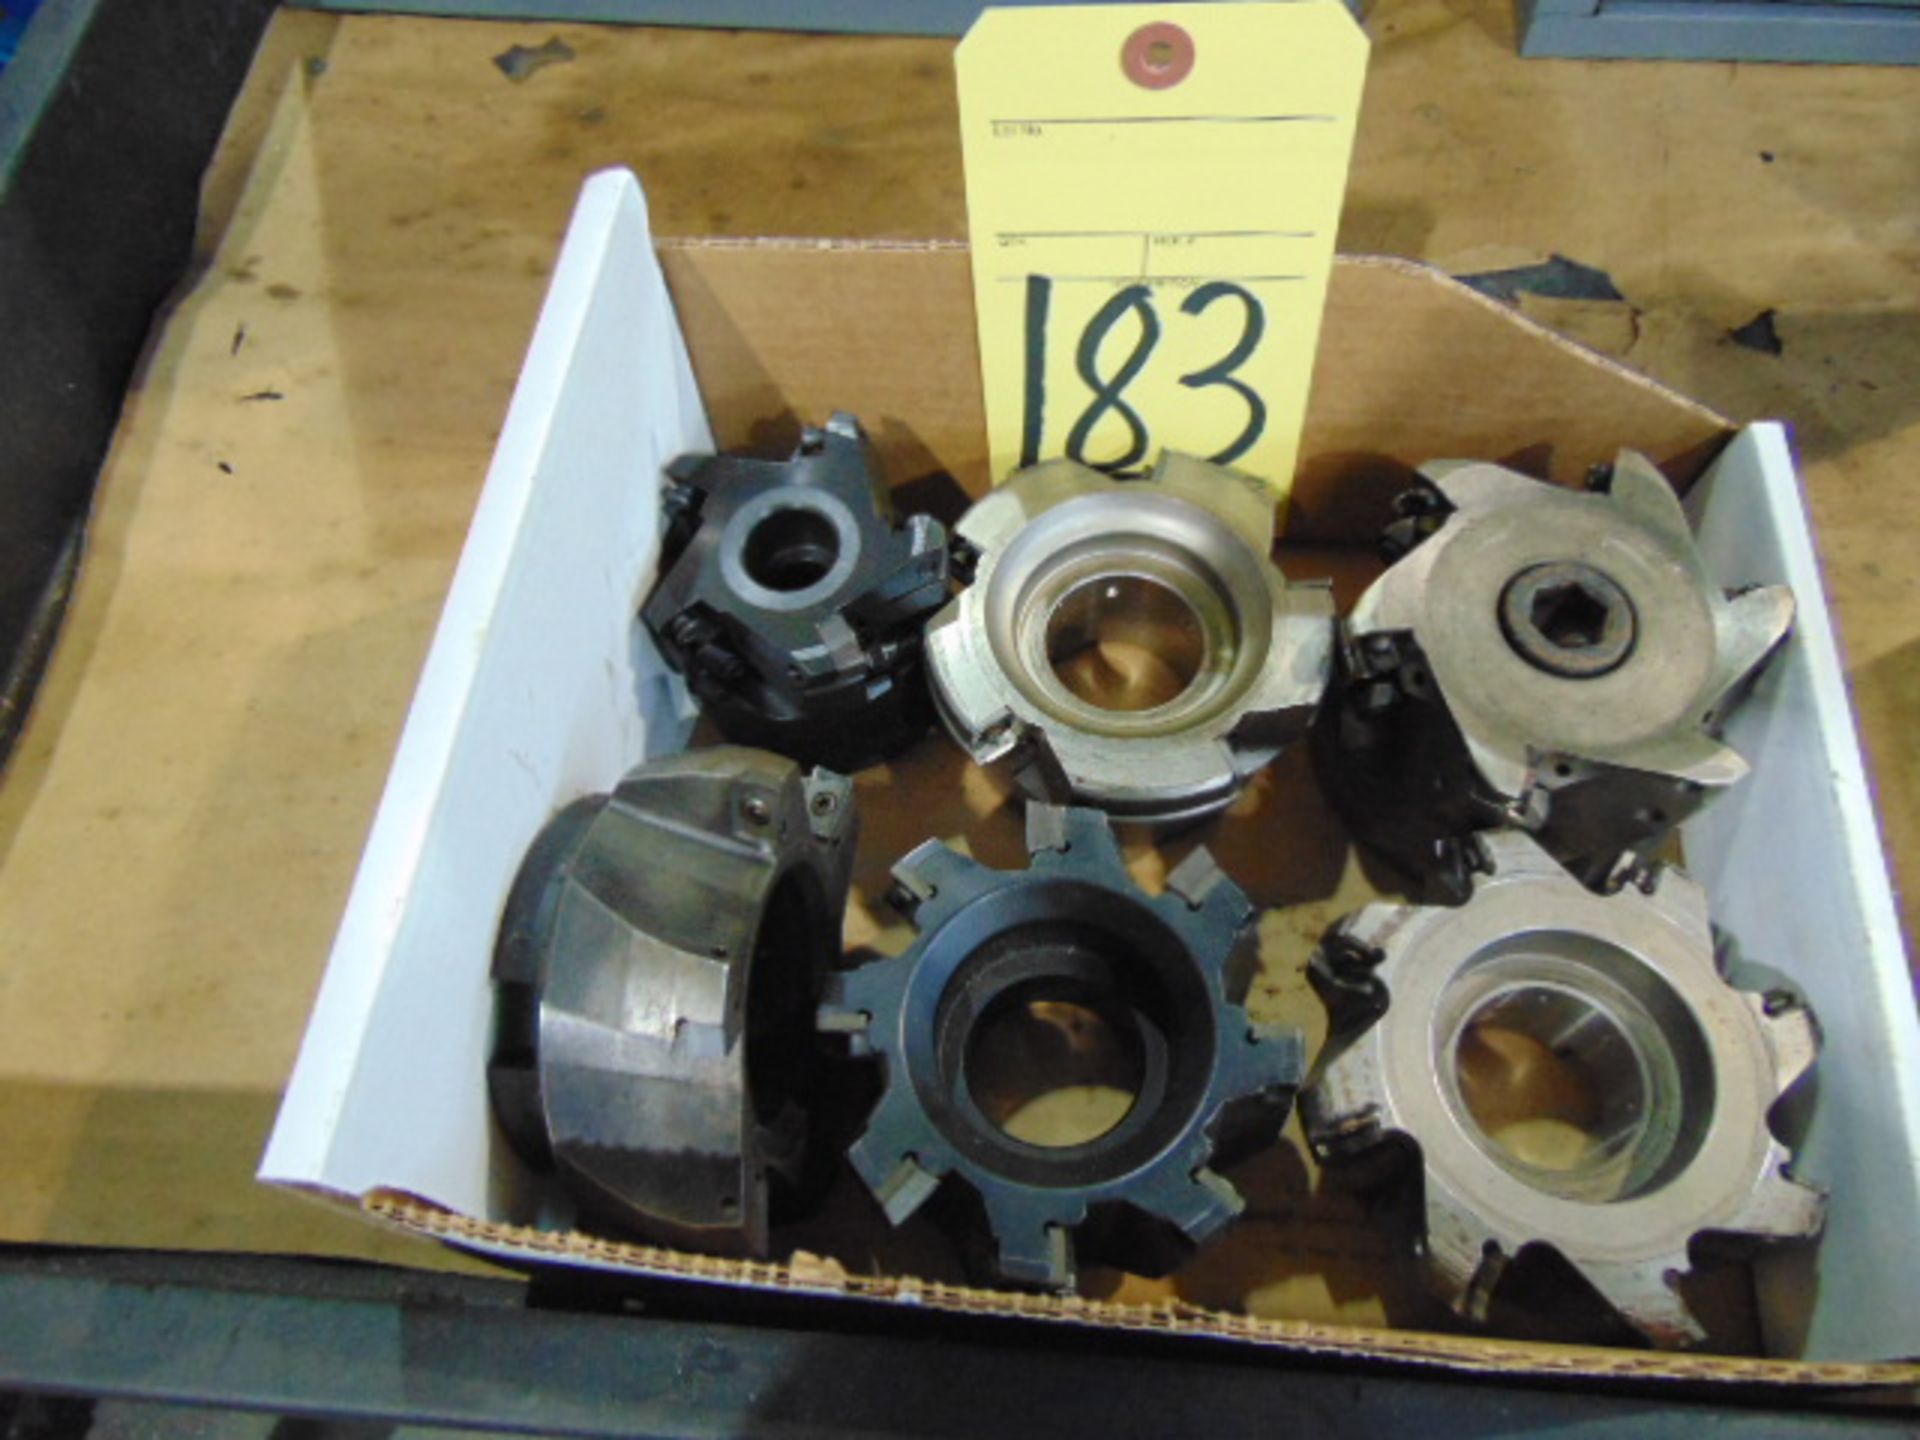 LOT OF MILLING CUTTERS, assorted (in one box)